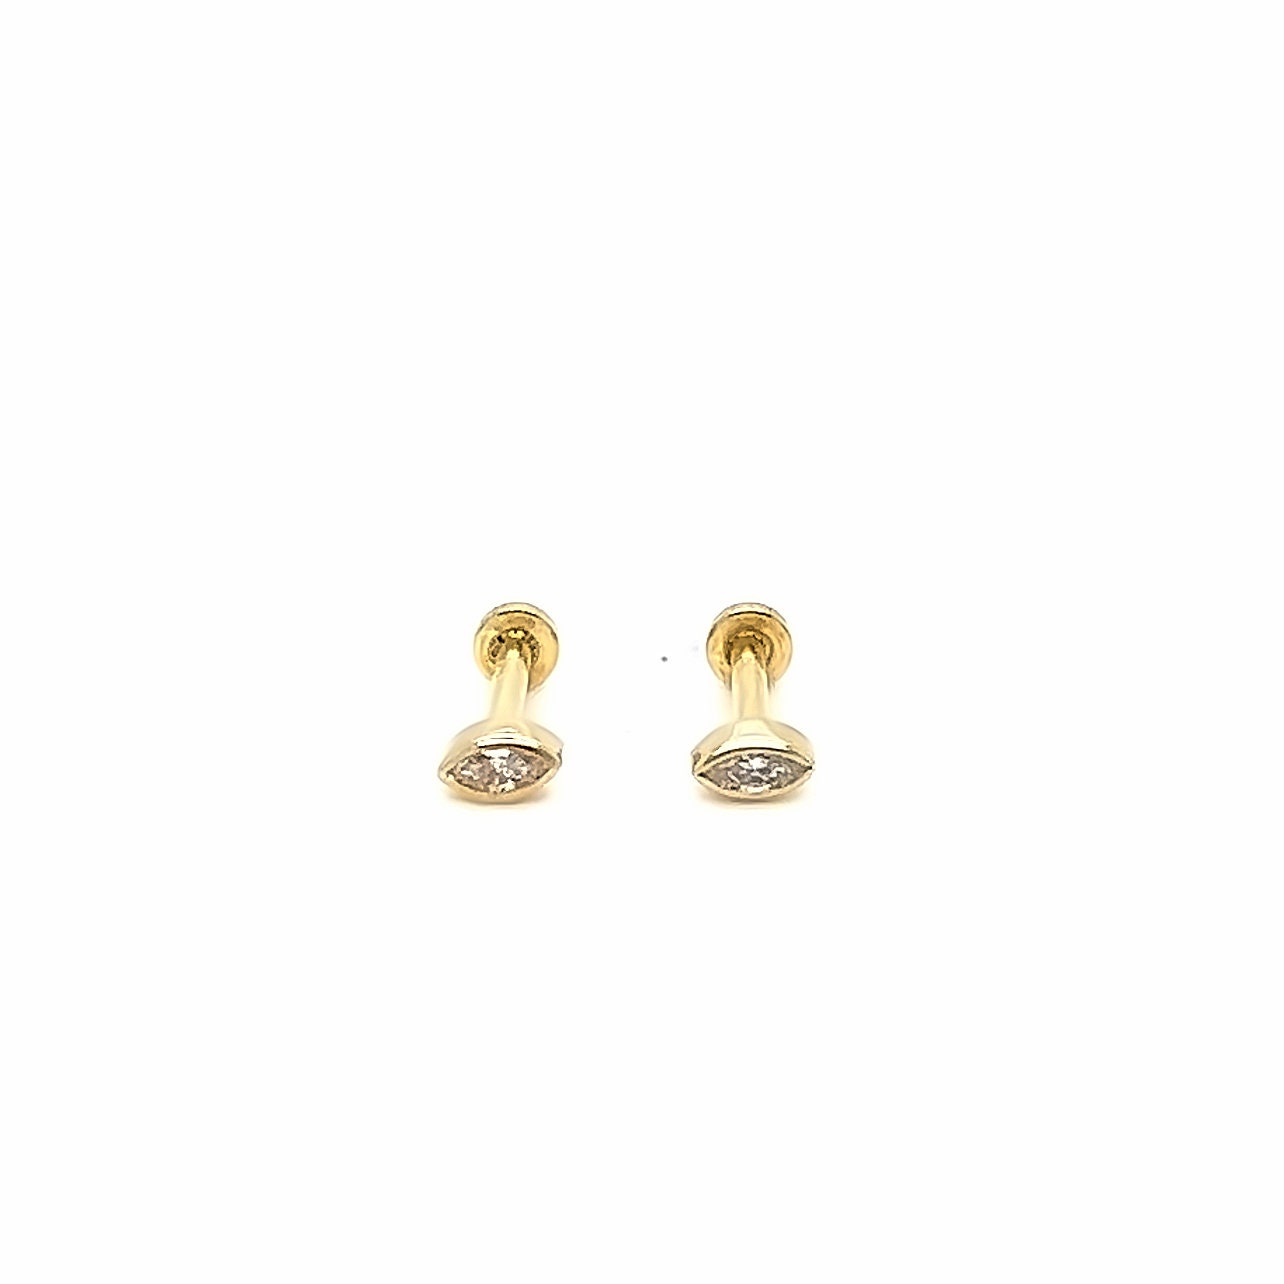 Marquise Cut Diamond Stud Earrings in Solid 14K Yellow Gold, Bezel Set, Small, Natural Diamond.